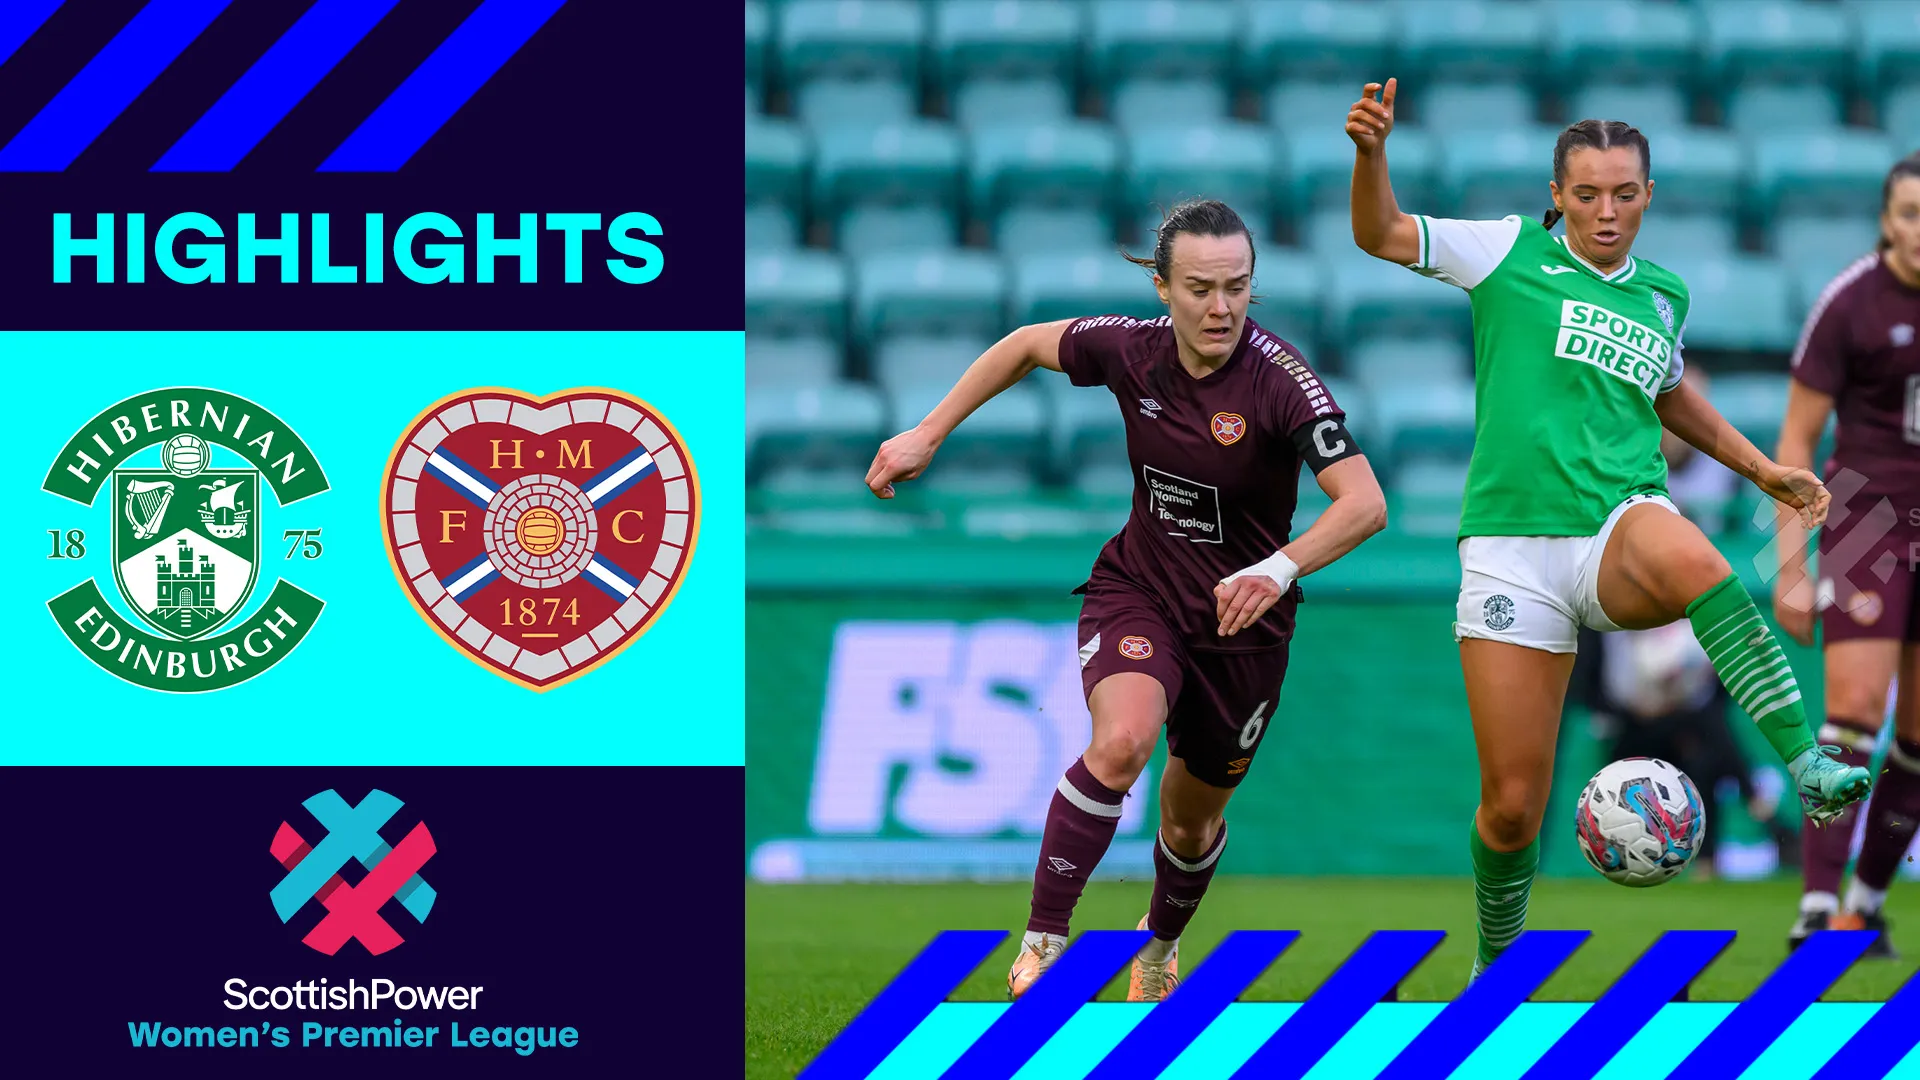 Image for Hibernian 2-1 Heart of Midlothian | Hibs take bragging rights with second win over Jambos | SWPL